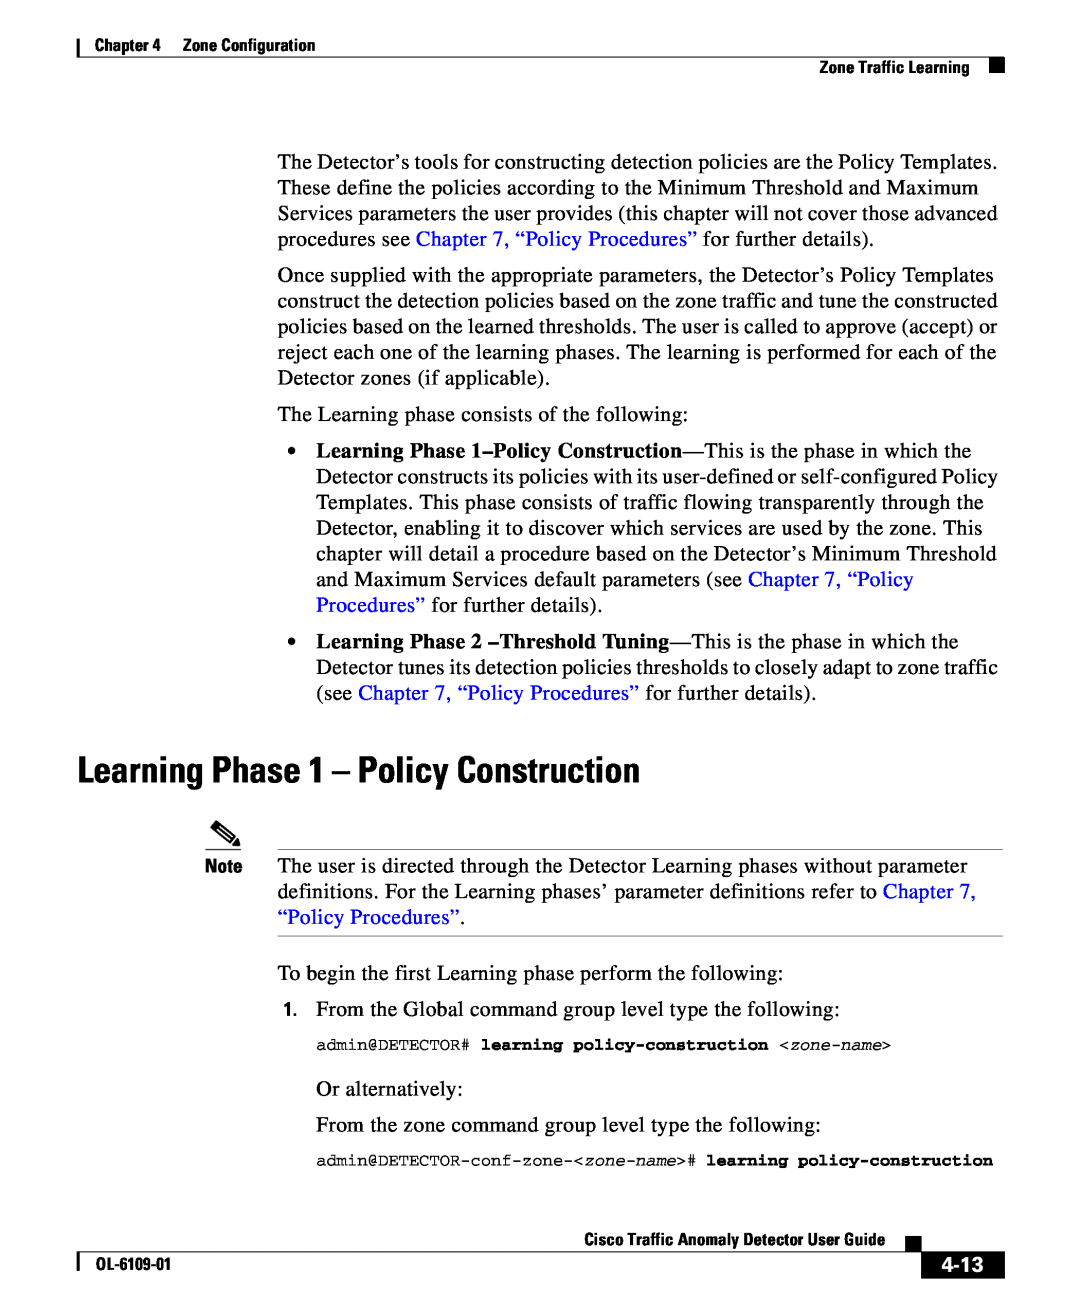 Cisco Systems OL-6109-01 manual Learning Phase 1 - Policy Construction, 4-13 